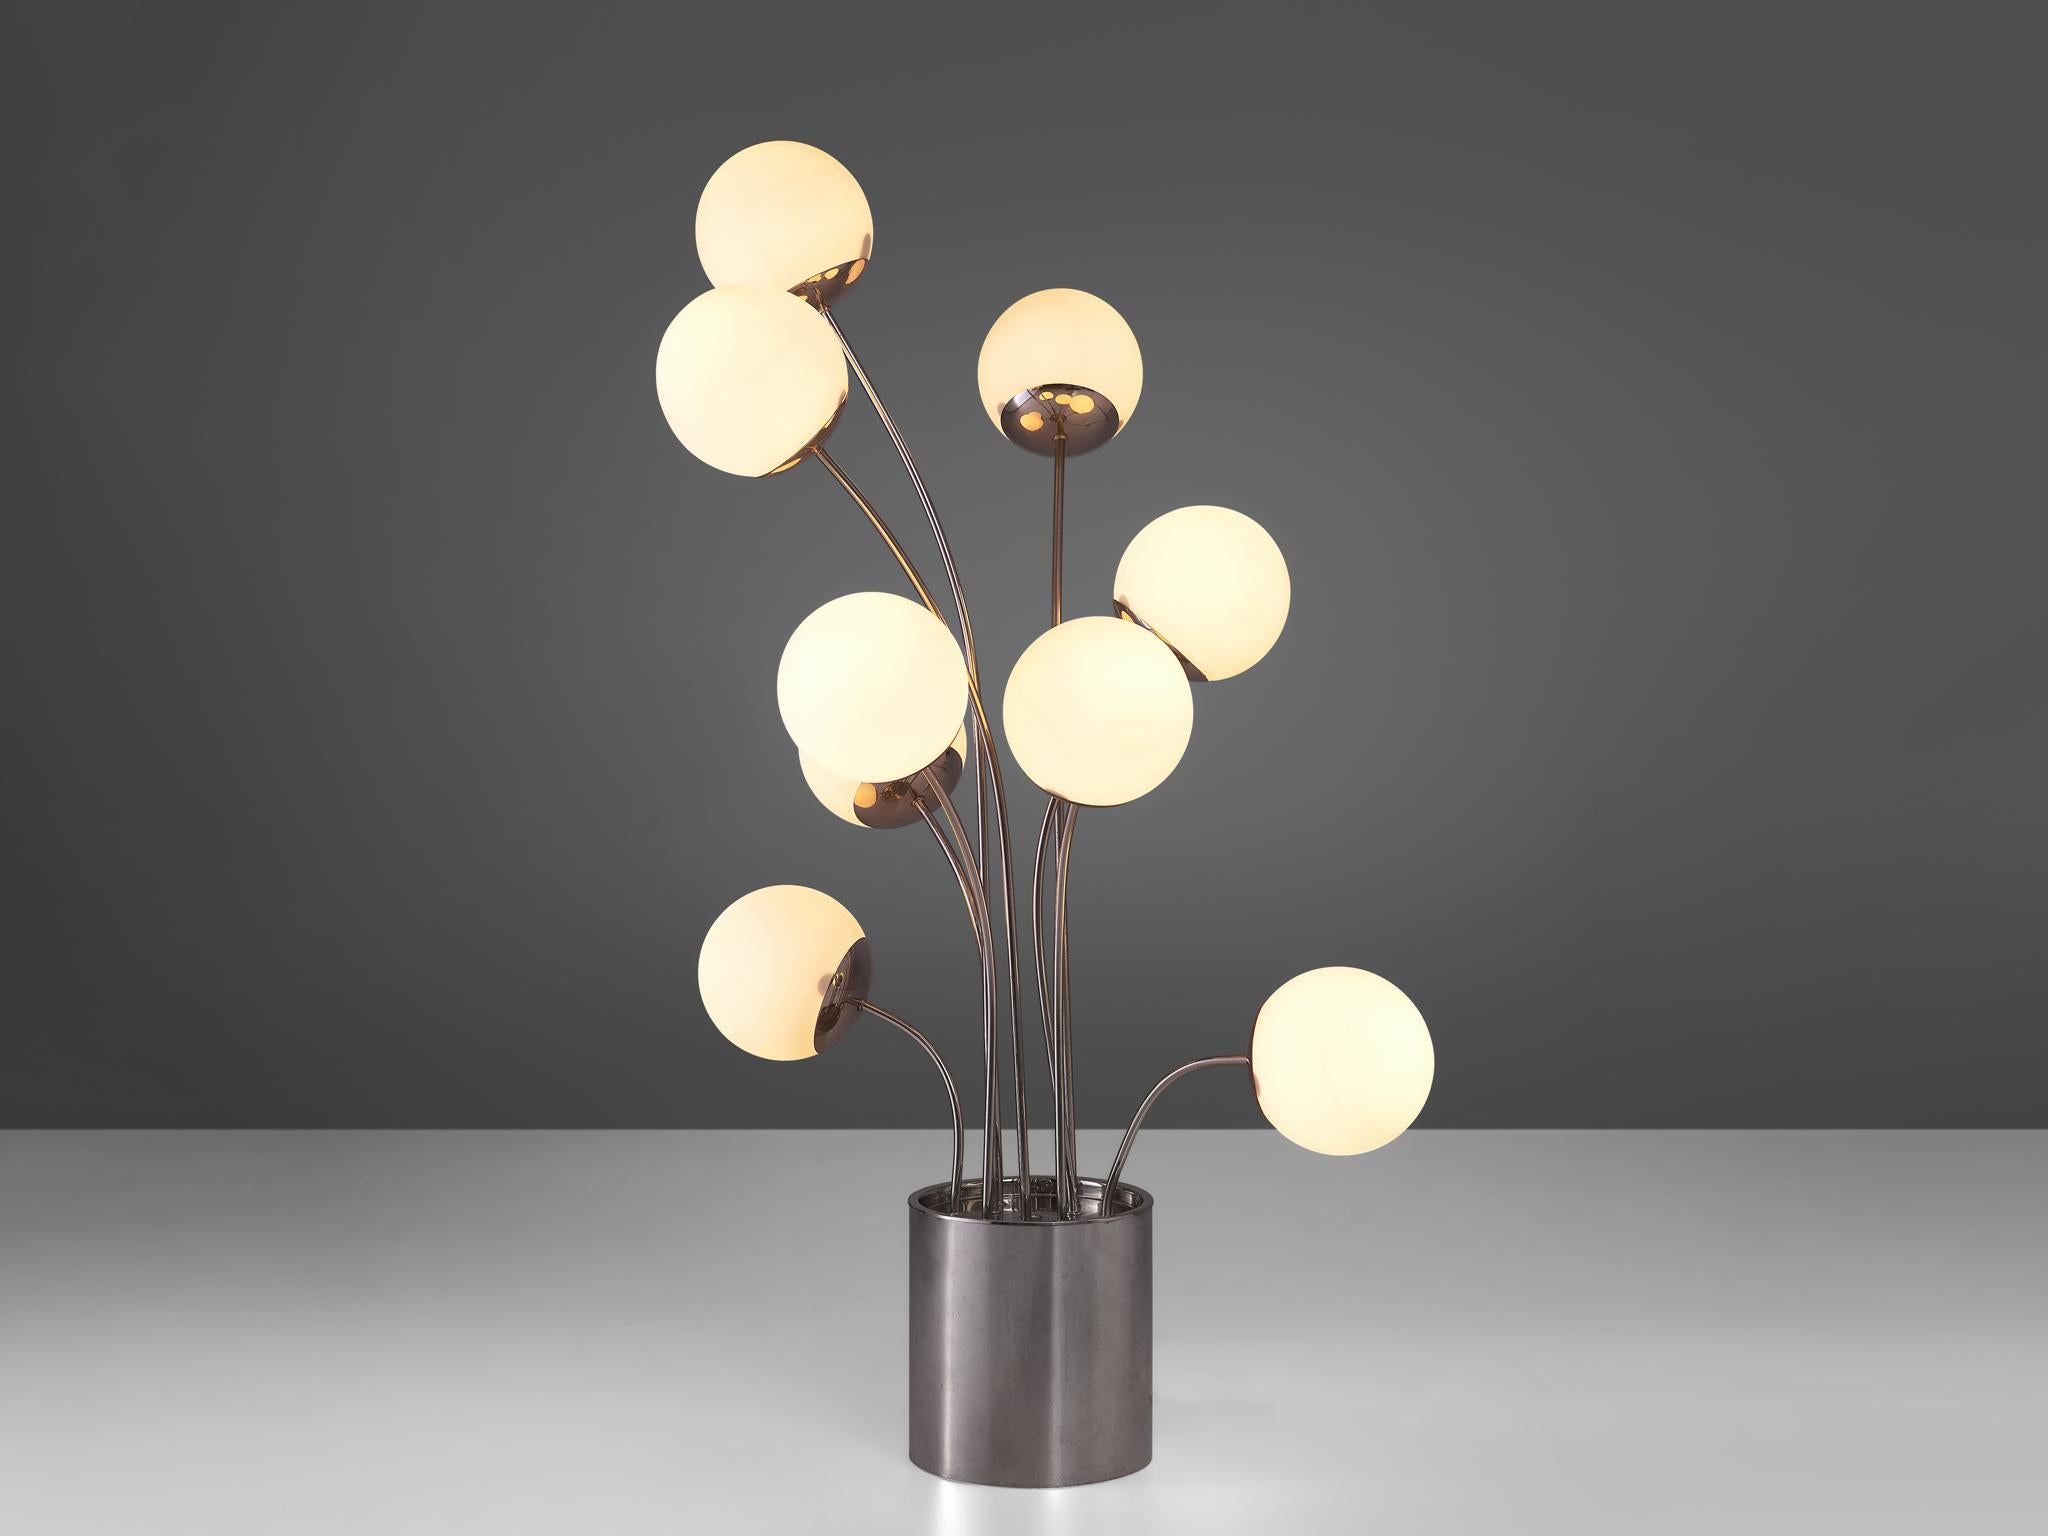 Pia Guidetti Crippa for Lumi, table lamp, chrome and opaline glass, Italy, 1970s.

A dynamic table lamp that features nine stems emanating from the chrome base. Each stem holds an opaline glass globe shade. The have a frivolous appearance and